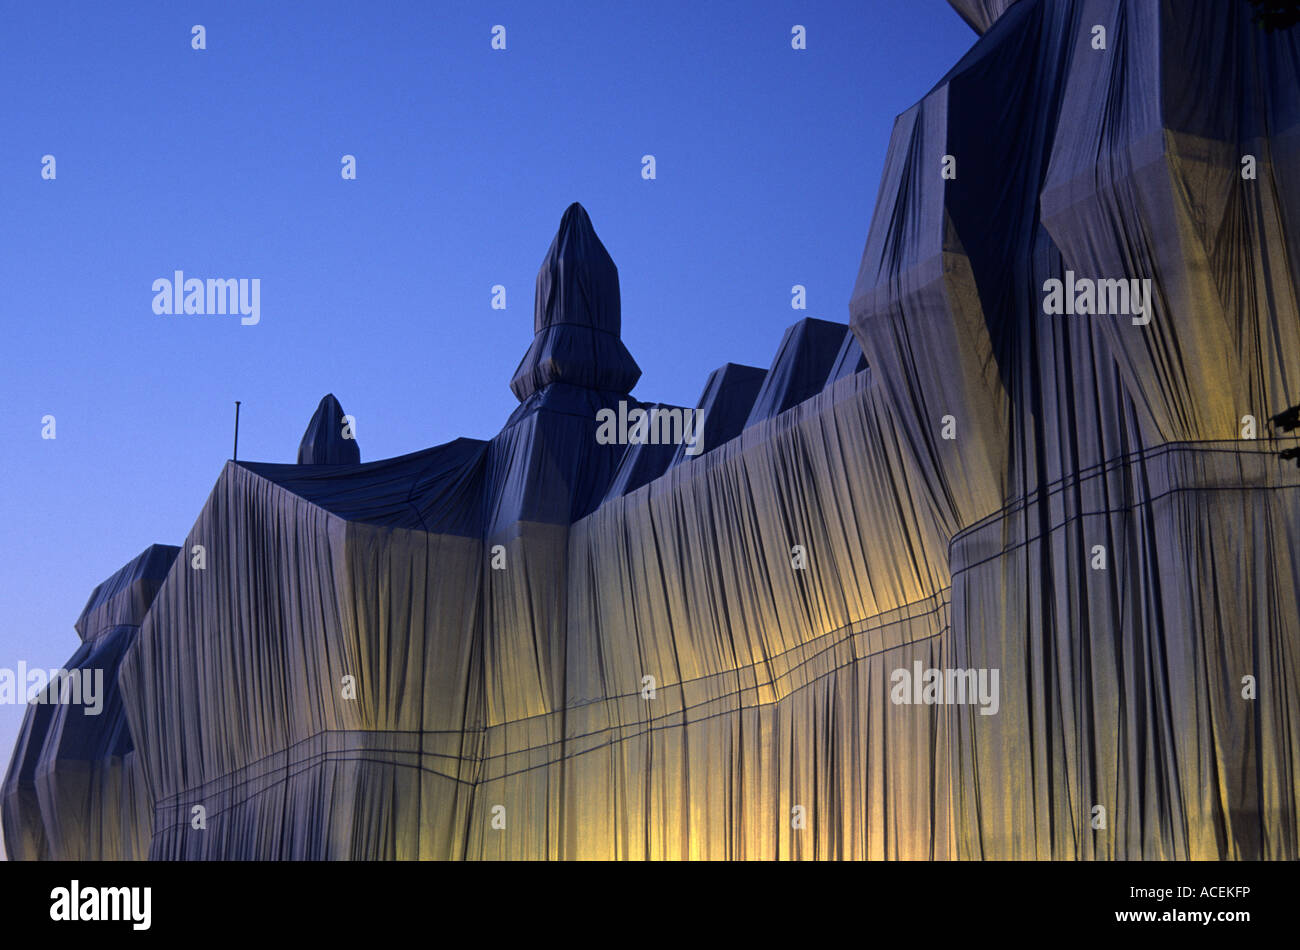 The Wrapped Reichstag at dusk, Berlin, Germany. Stock Photo